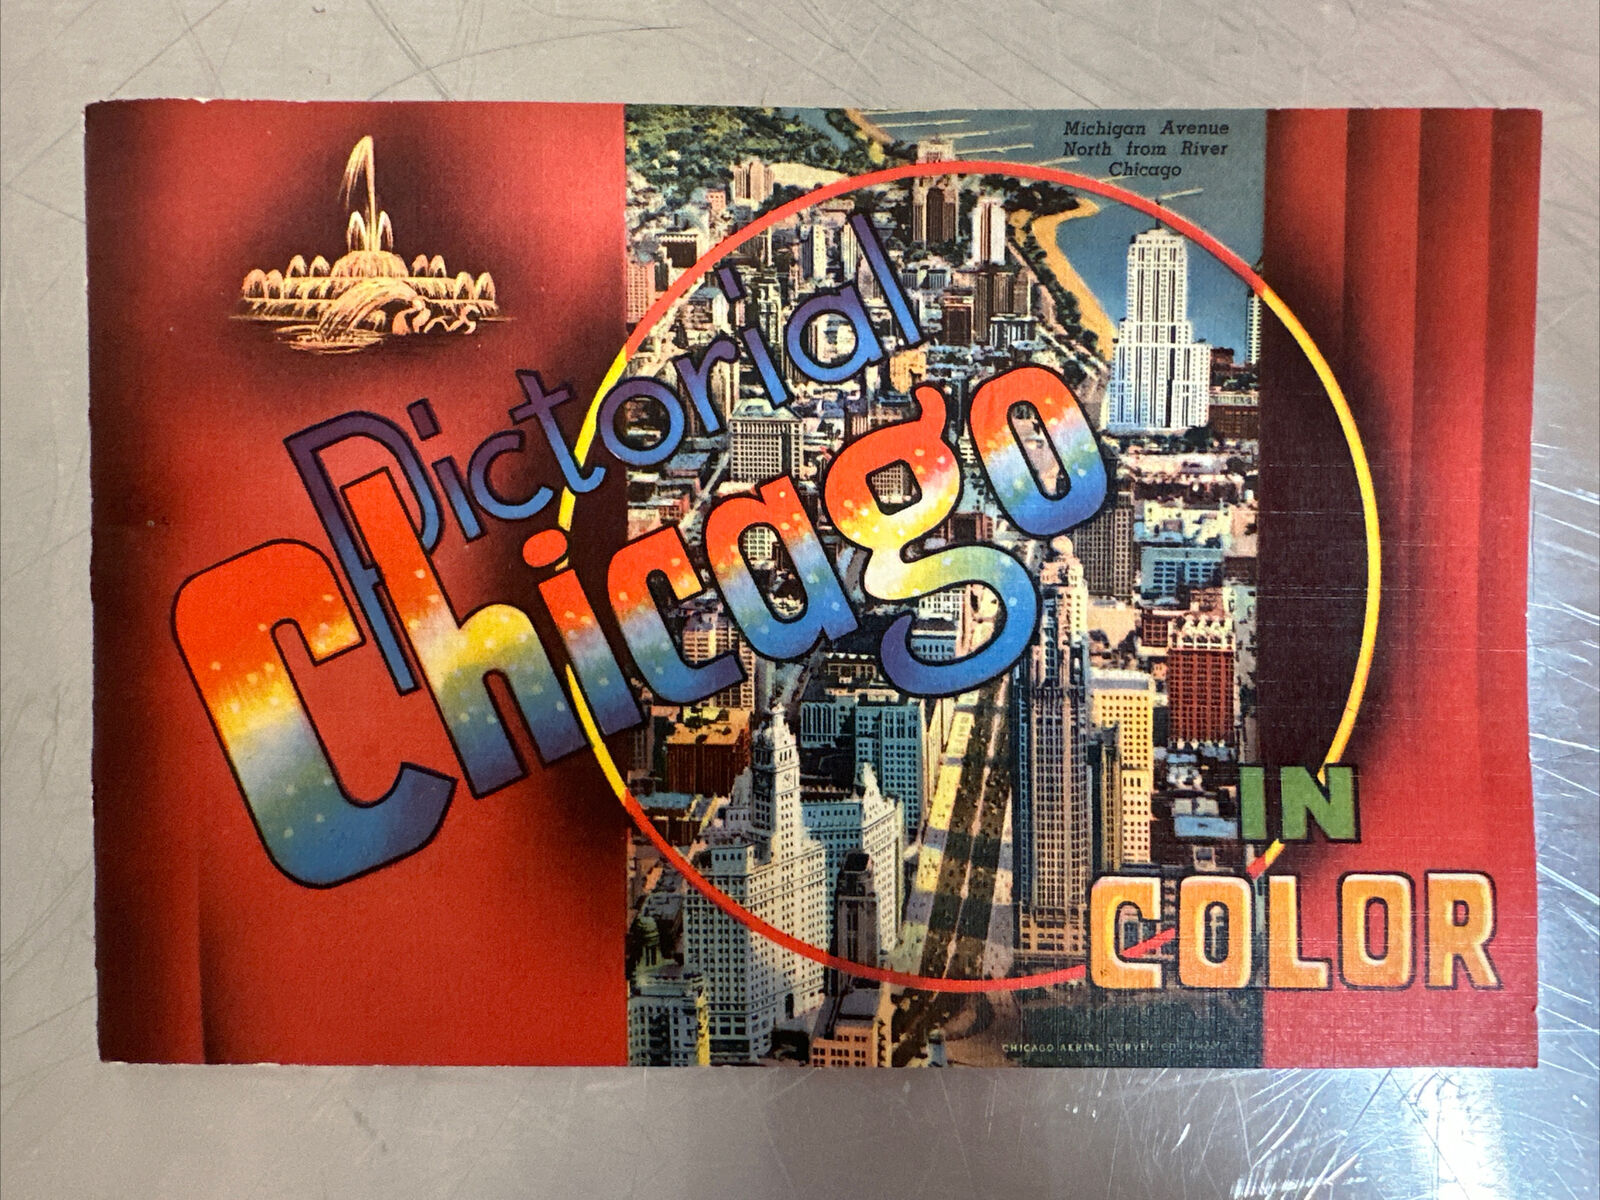 Pictorial Chicago In Color By Curt Teich And Co Inc Booklet 1950